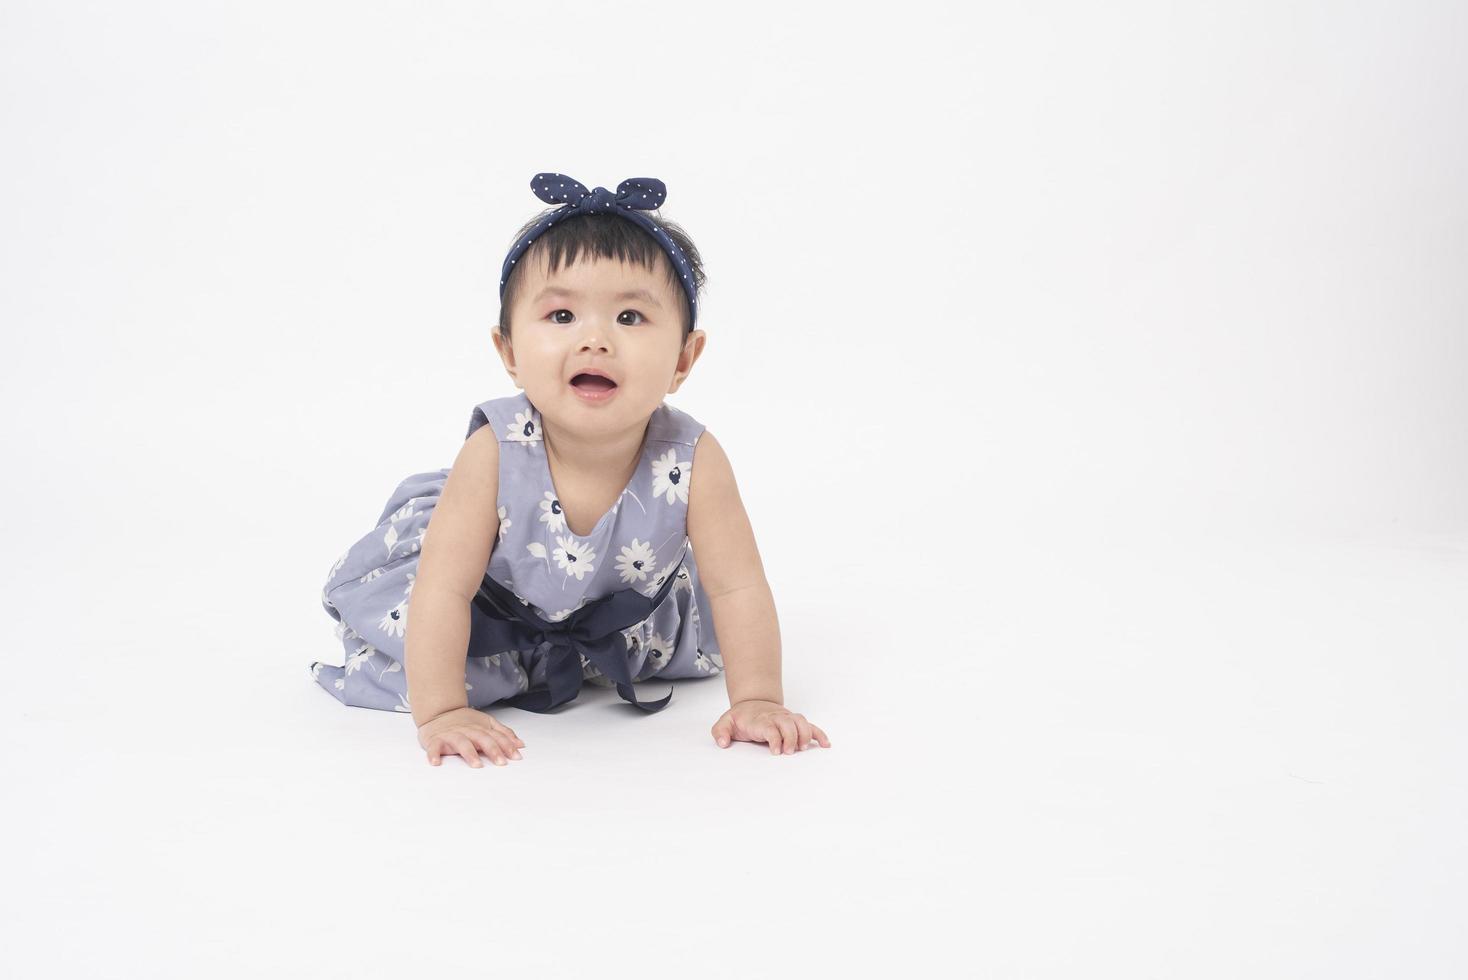 Adorable Asian baby girl is portrait on white background photo